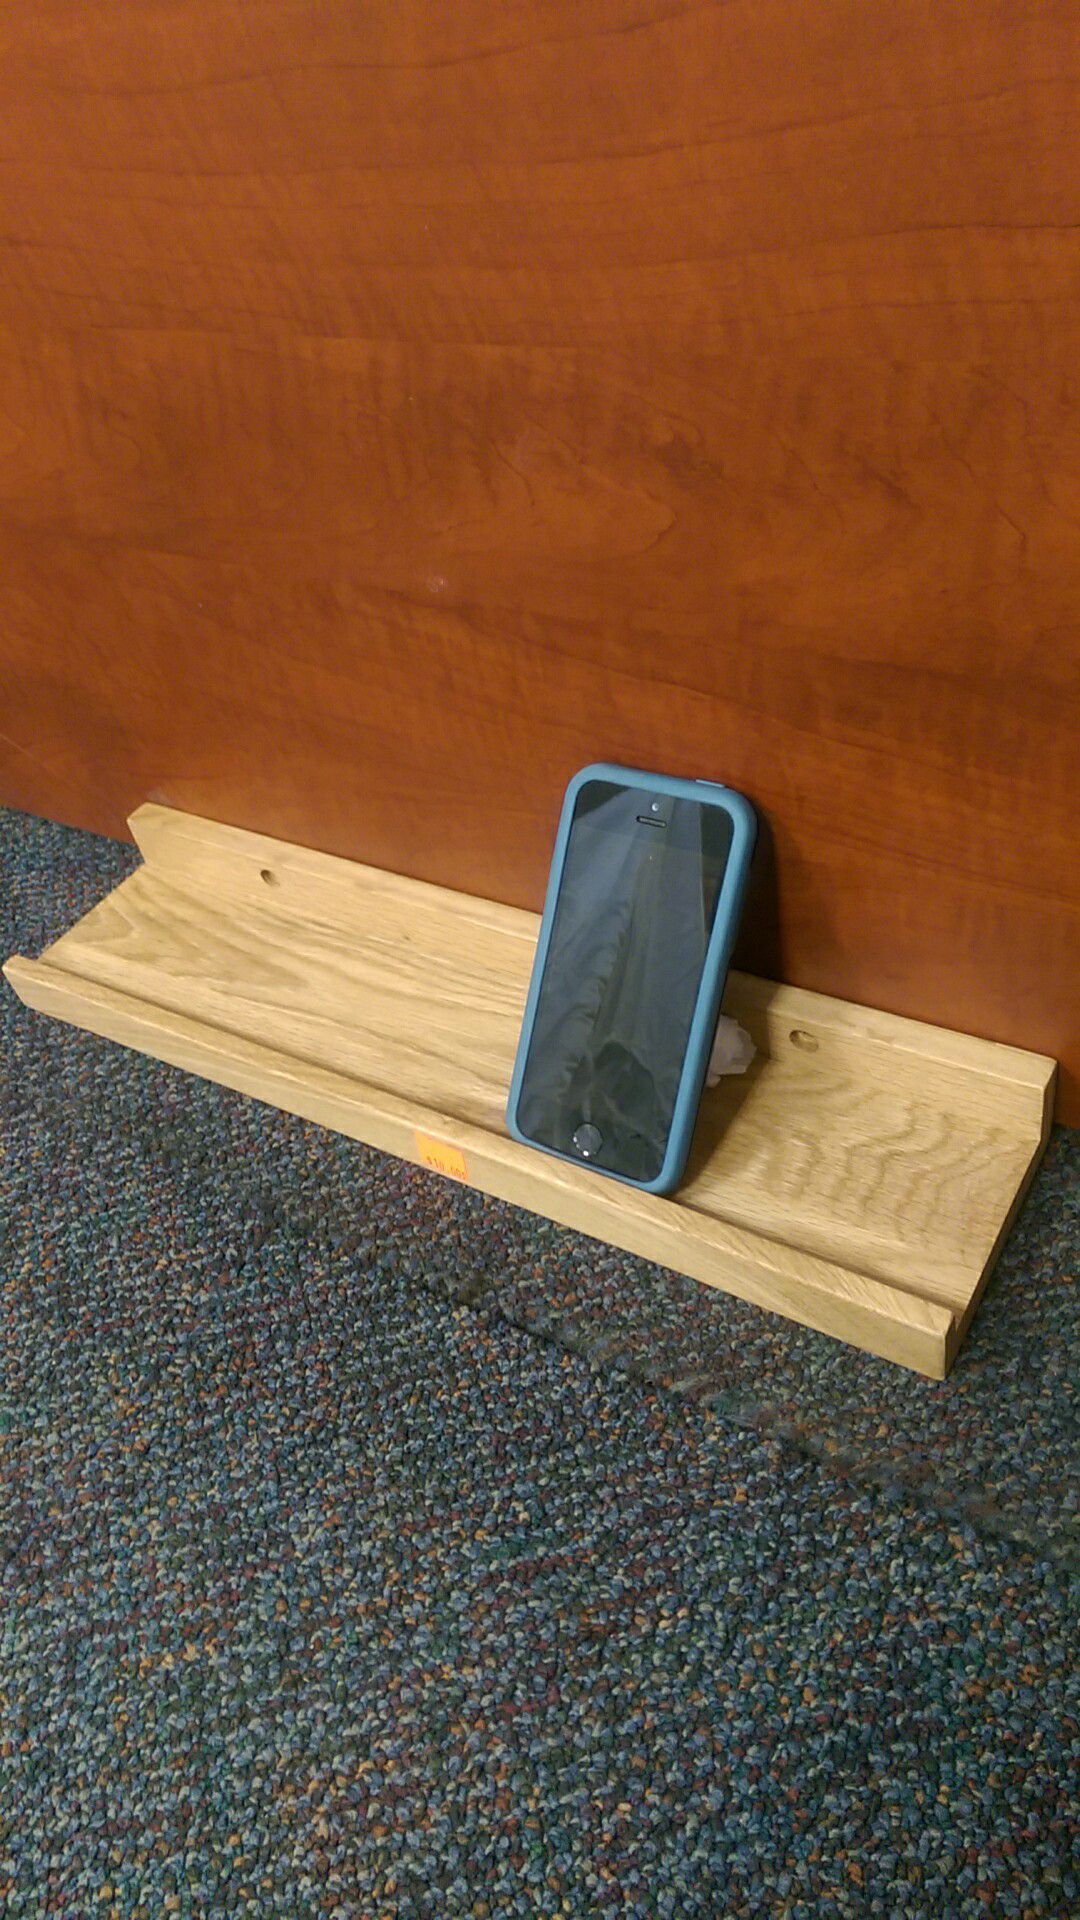 Small wooden shelf for phone charging